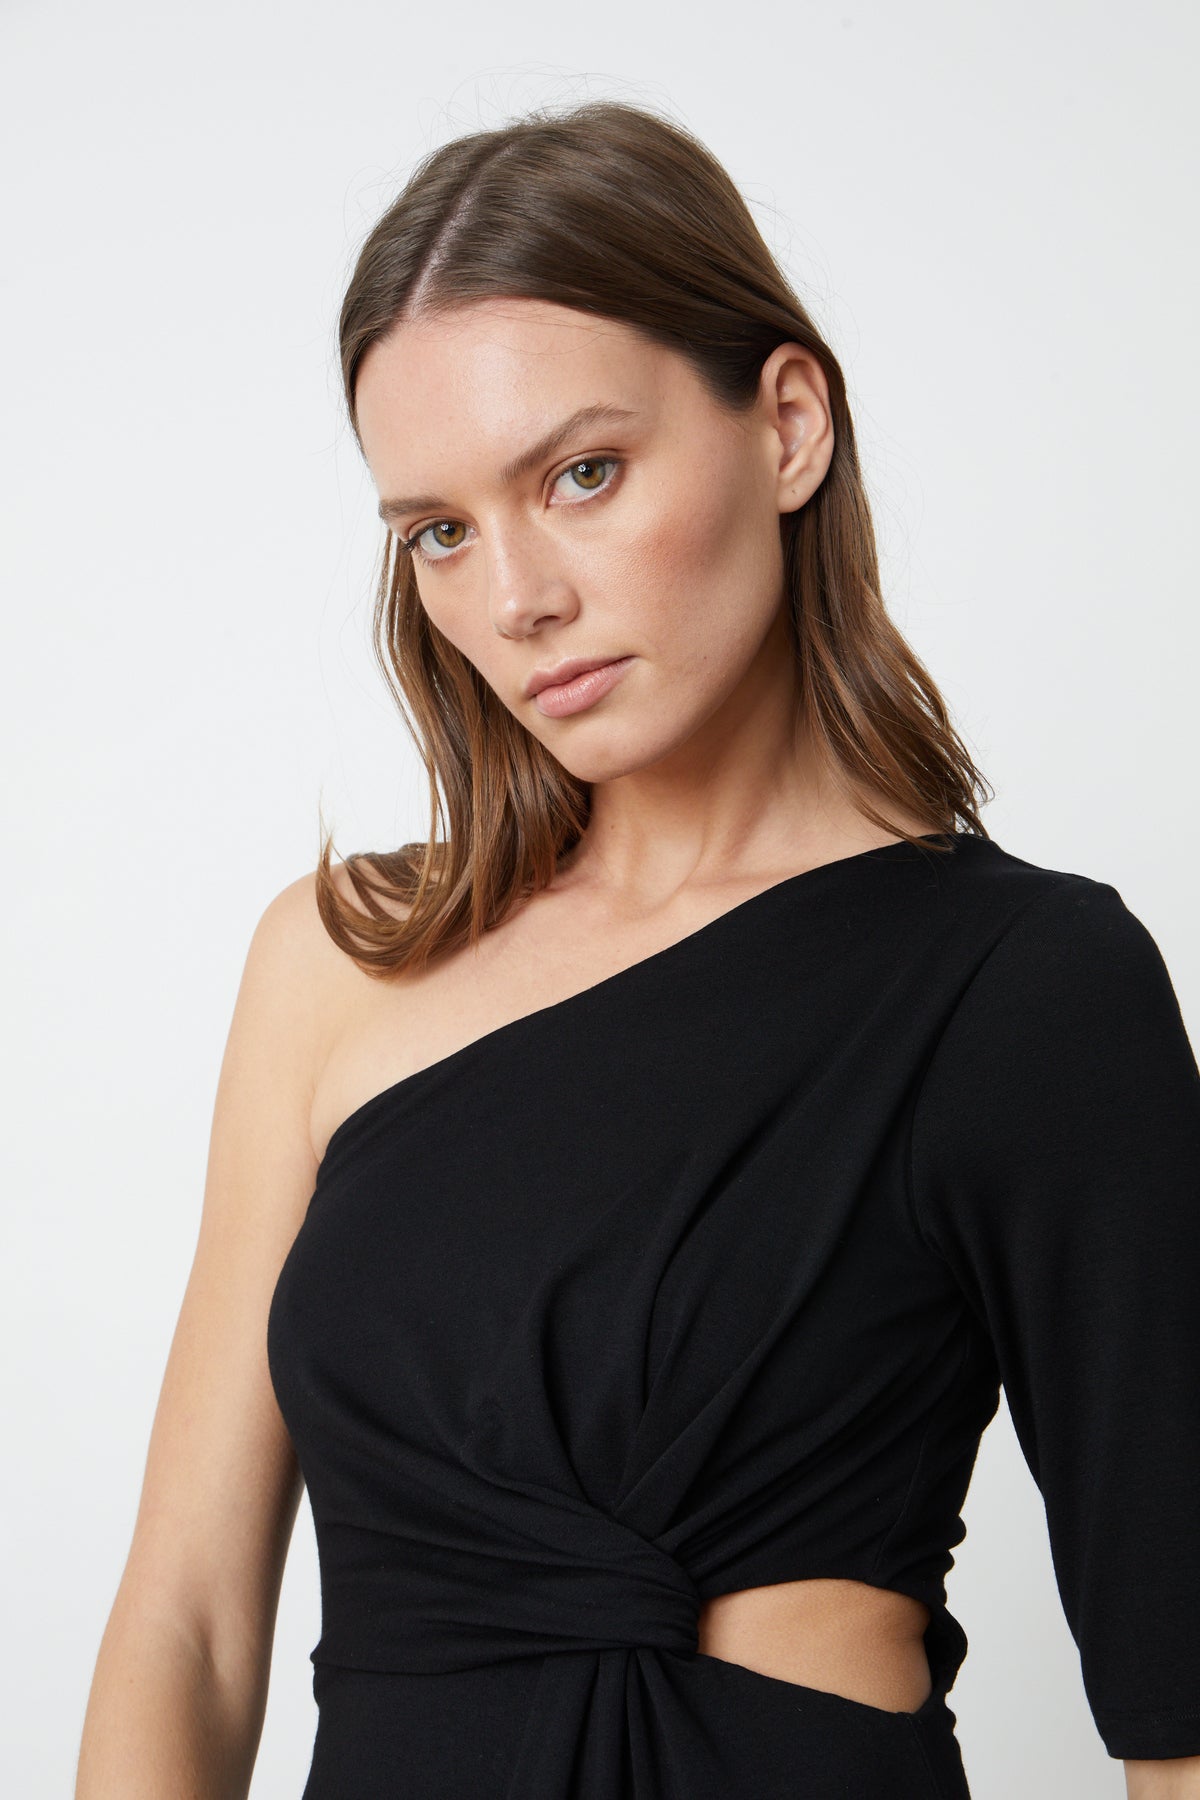 The model is wearing a black CAILIN CUT OUT ONE SHOULDER DRESS by Velvet by Graham & Spencer.-26552696570049